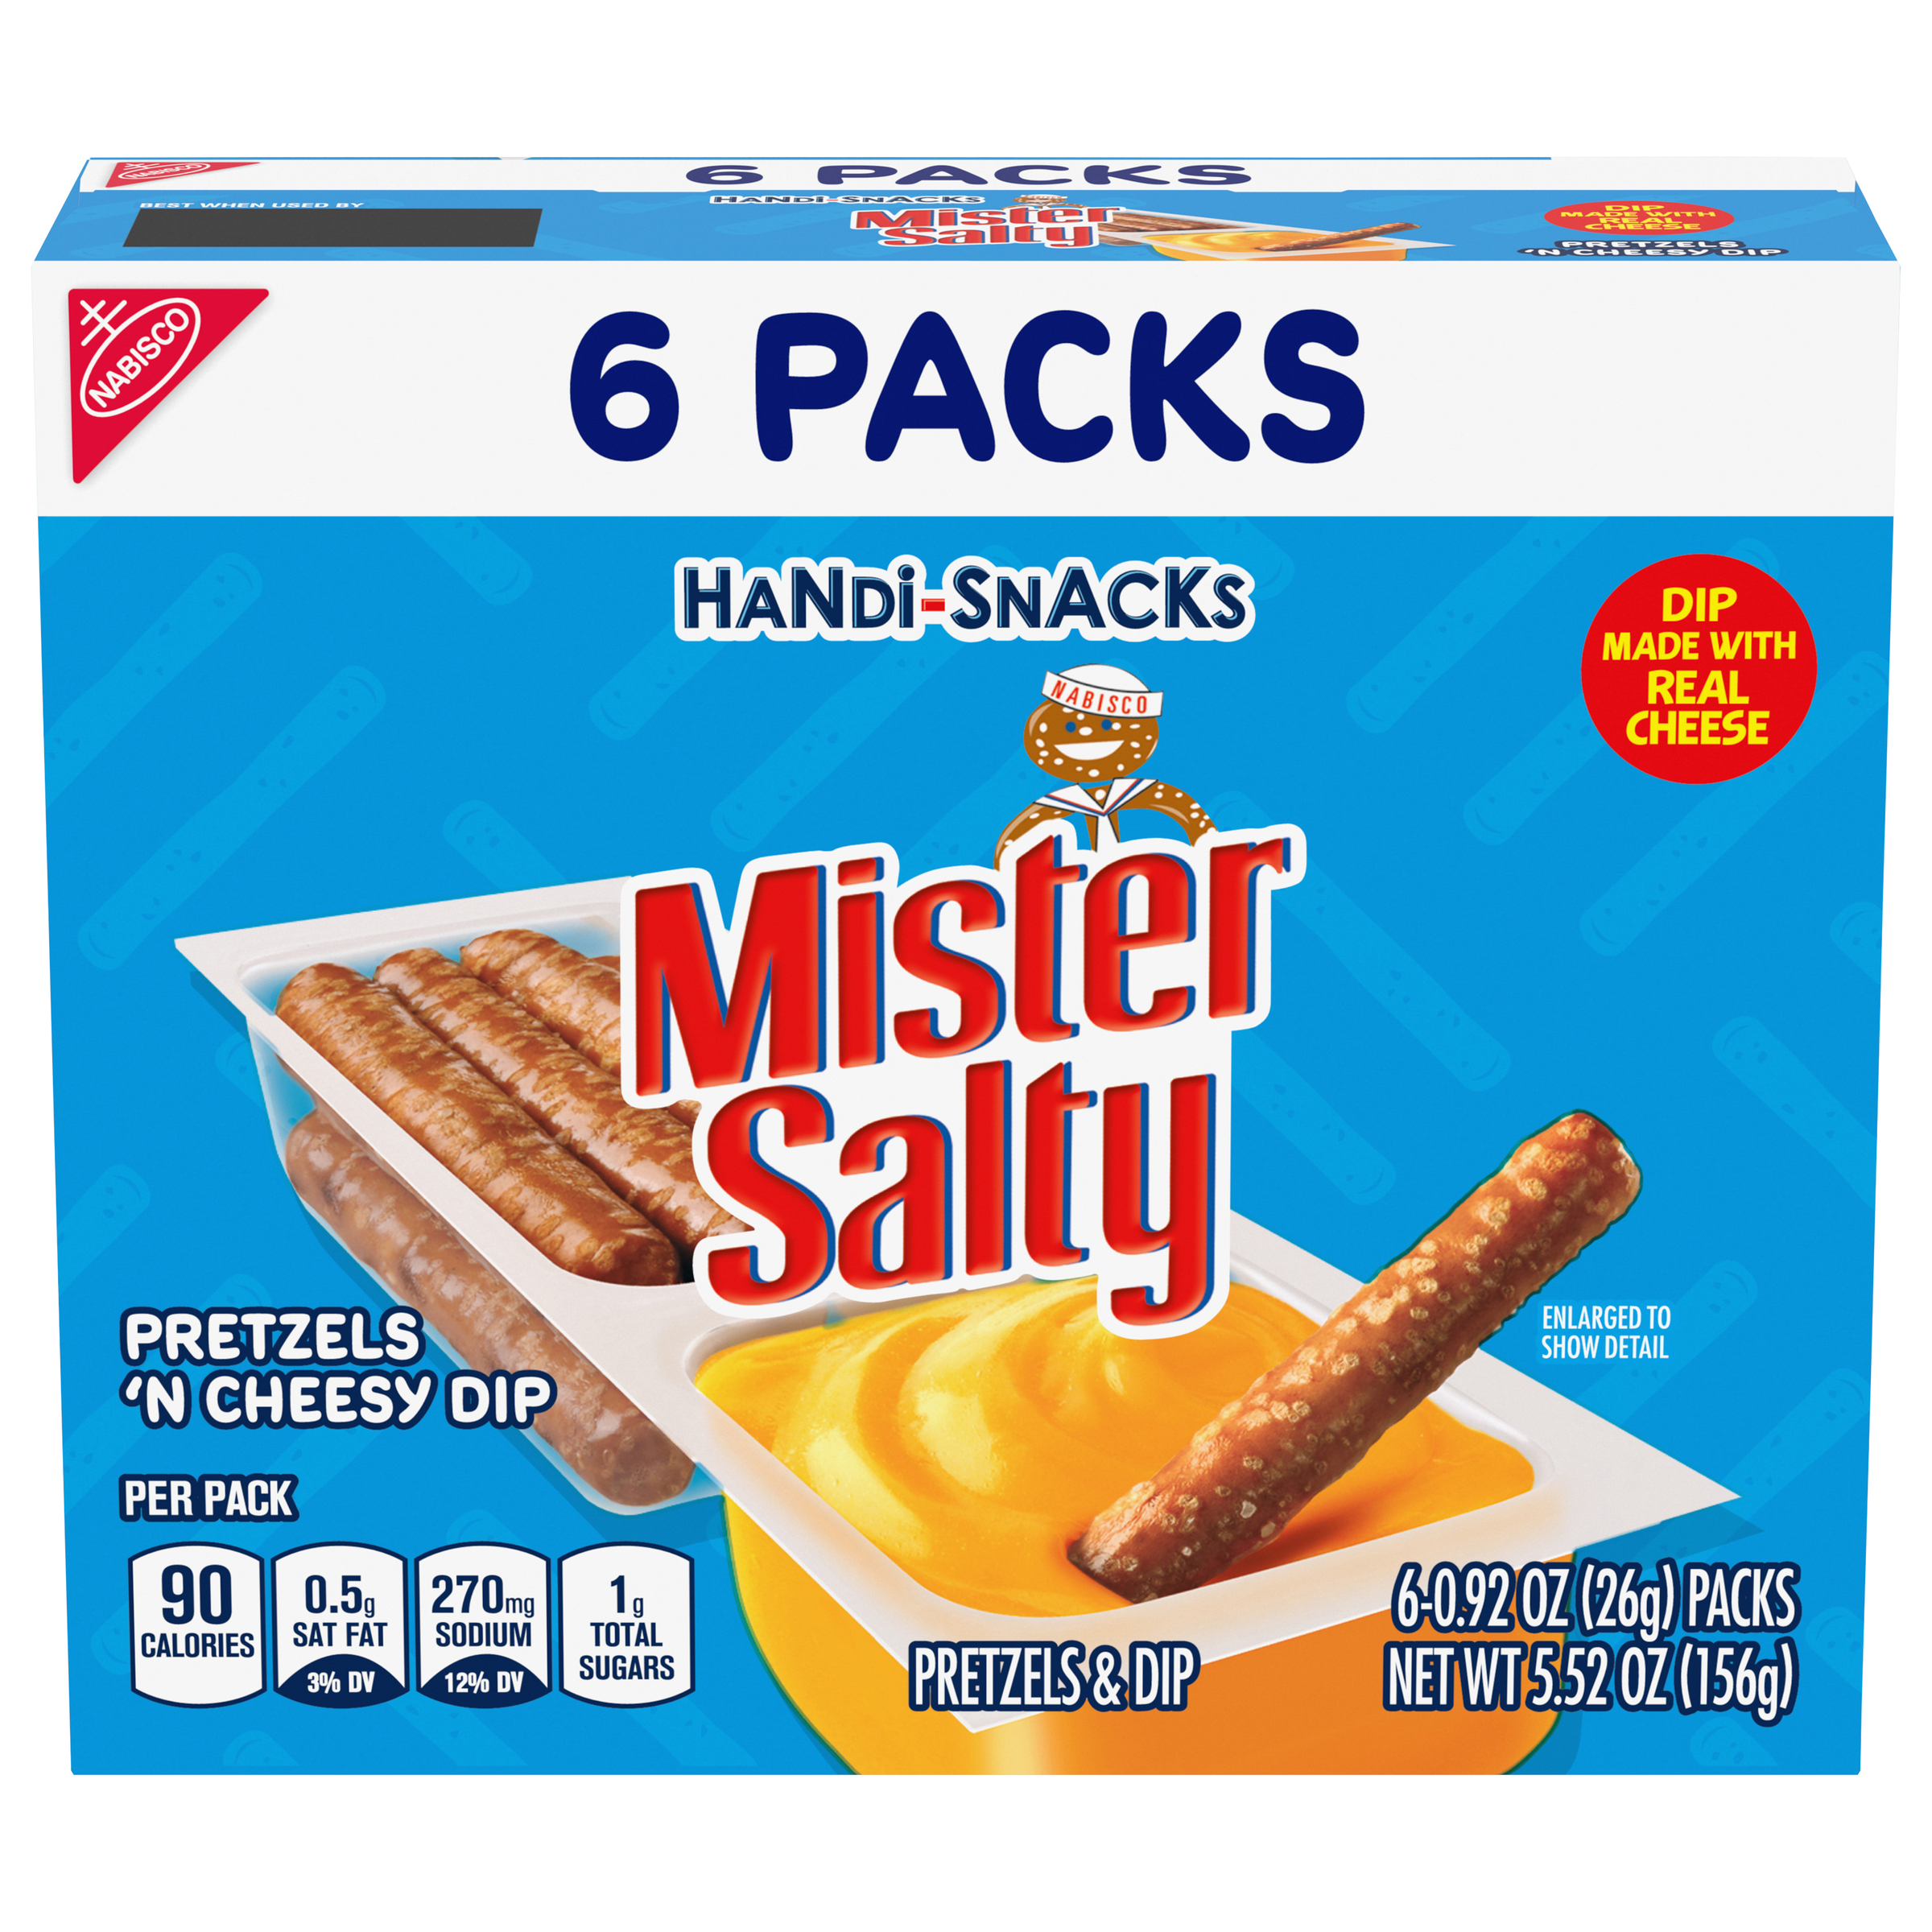 HANDI-SNACKS Mister Salty Cheese Crackers With Dip 5.52 oz